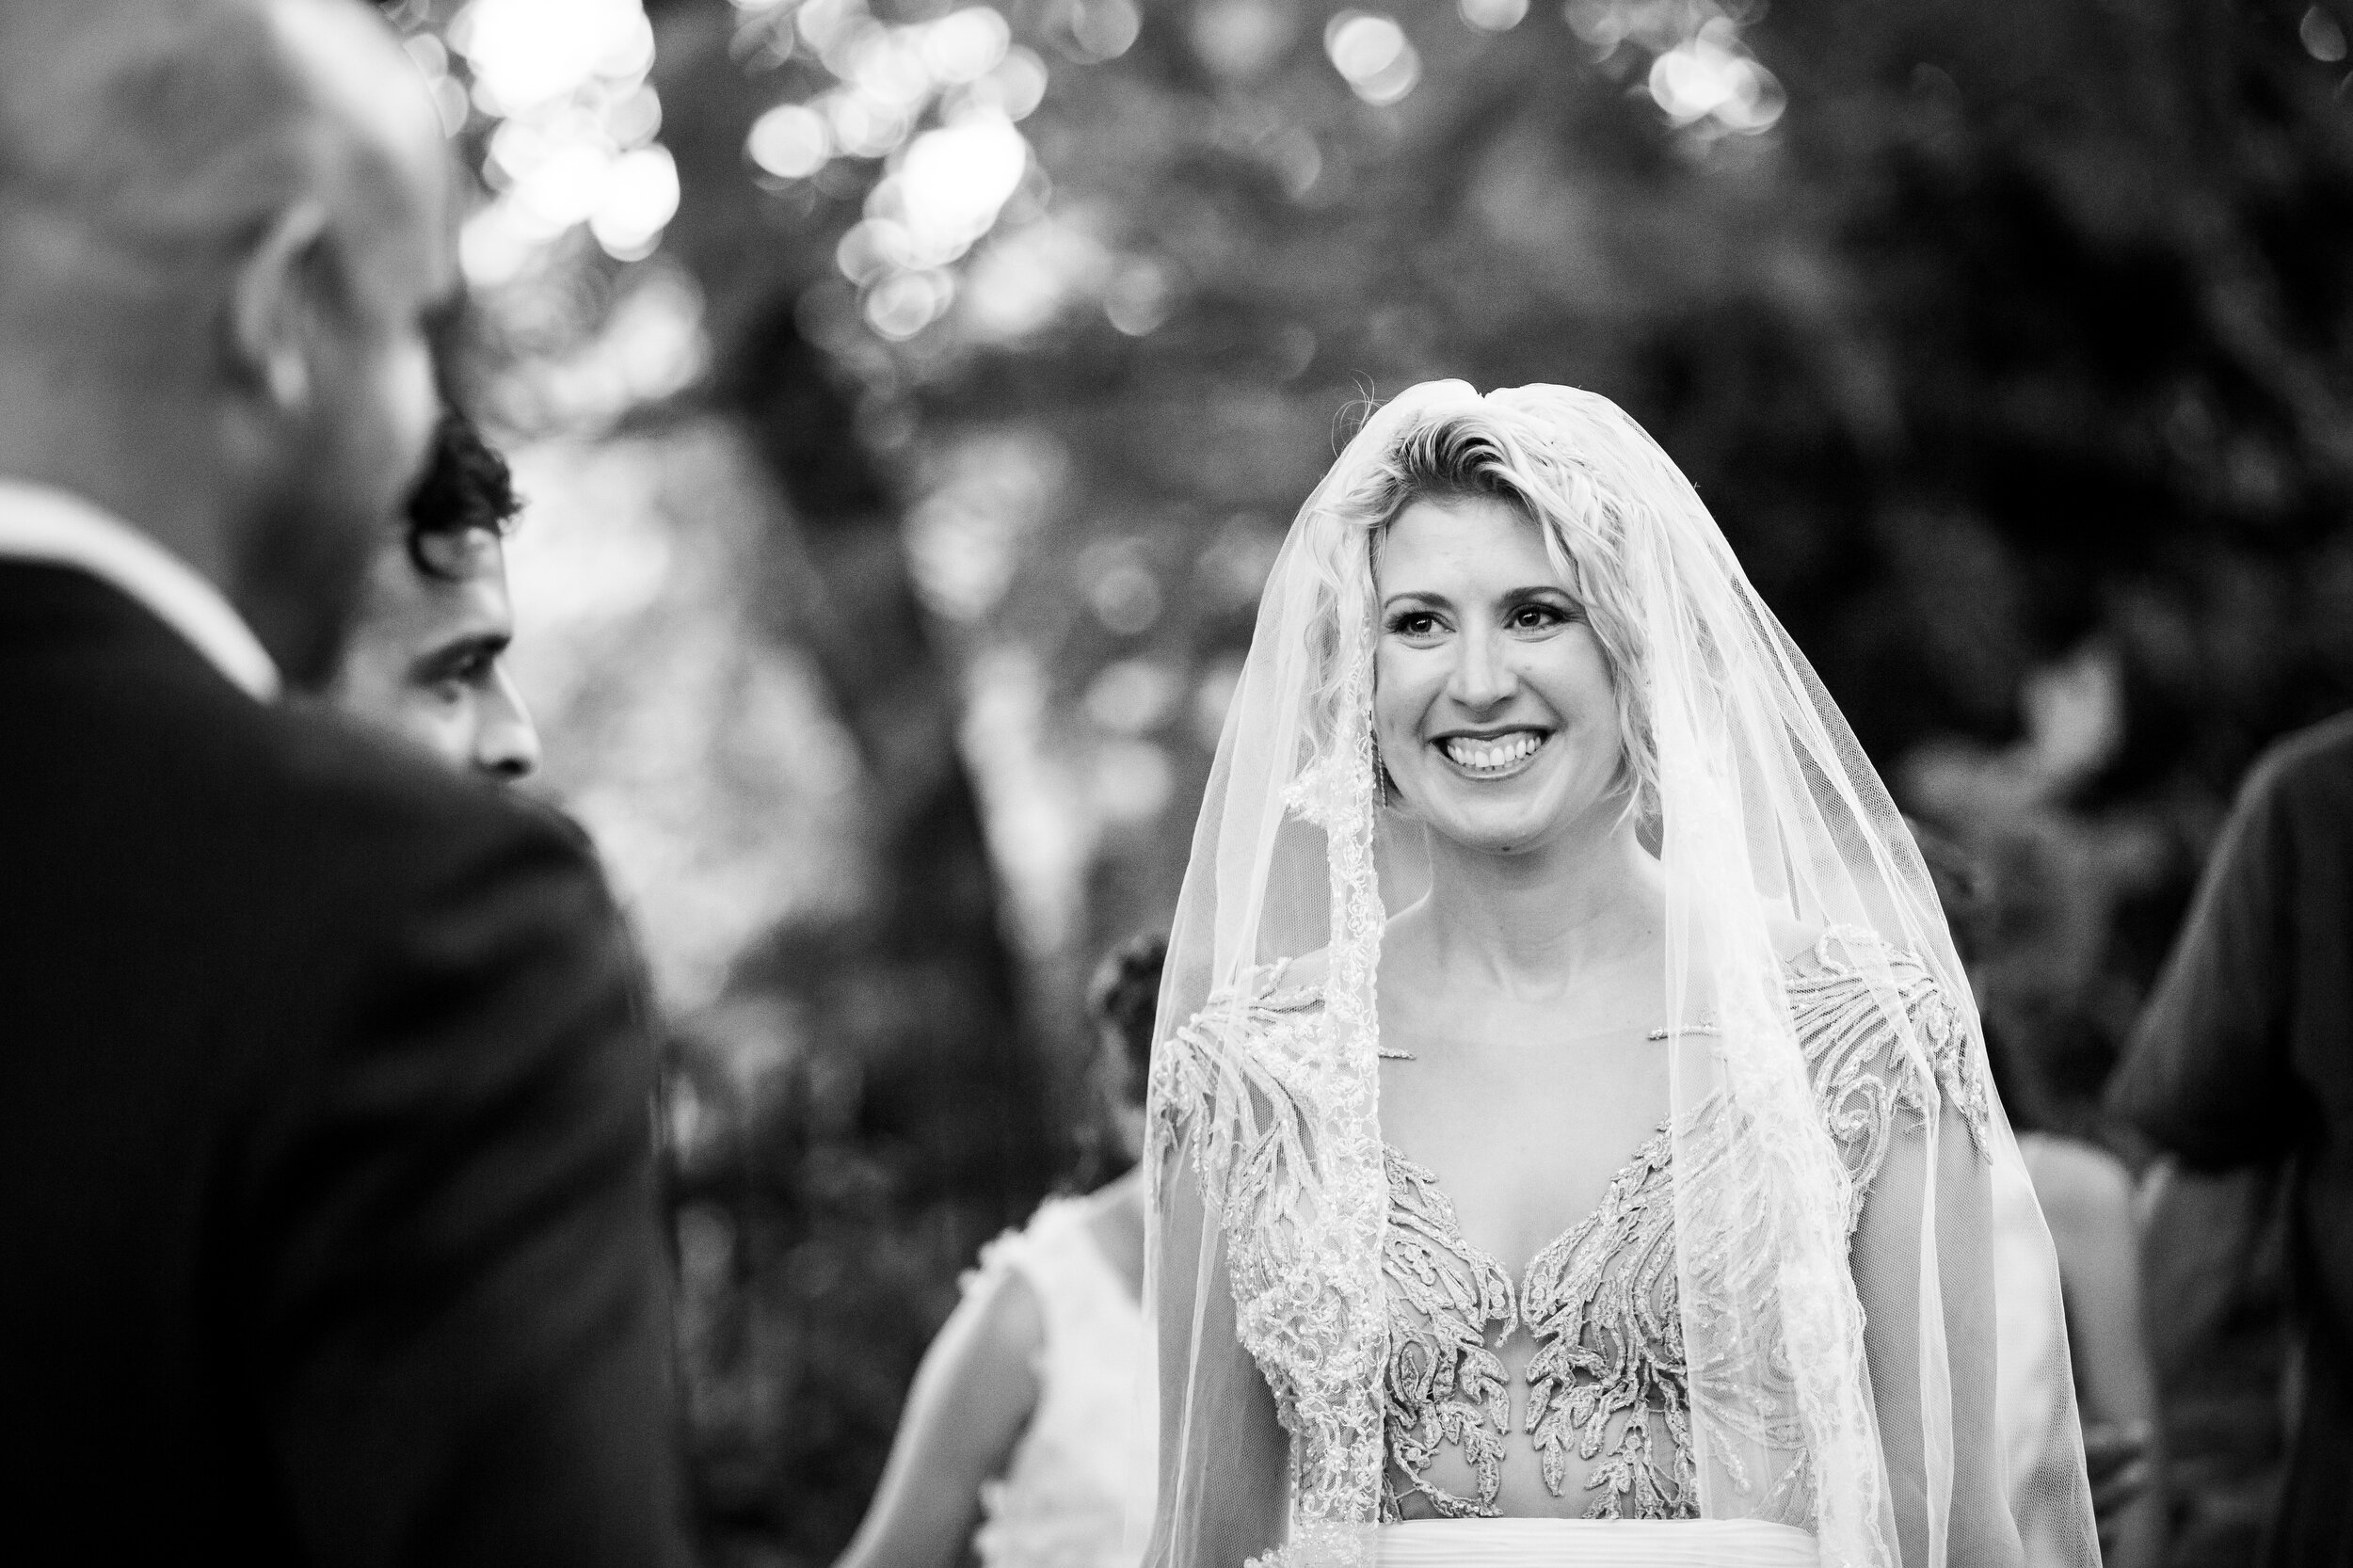 Bride smiles at her groom during the ceremony:  destination wedding photo at the Lost Unicorn Hotel, Tsagarada, Greece by J. Brown Photography.